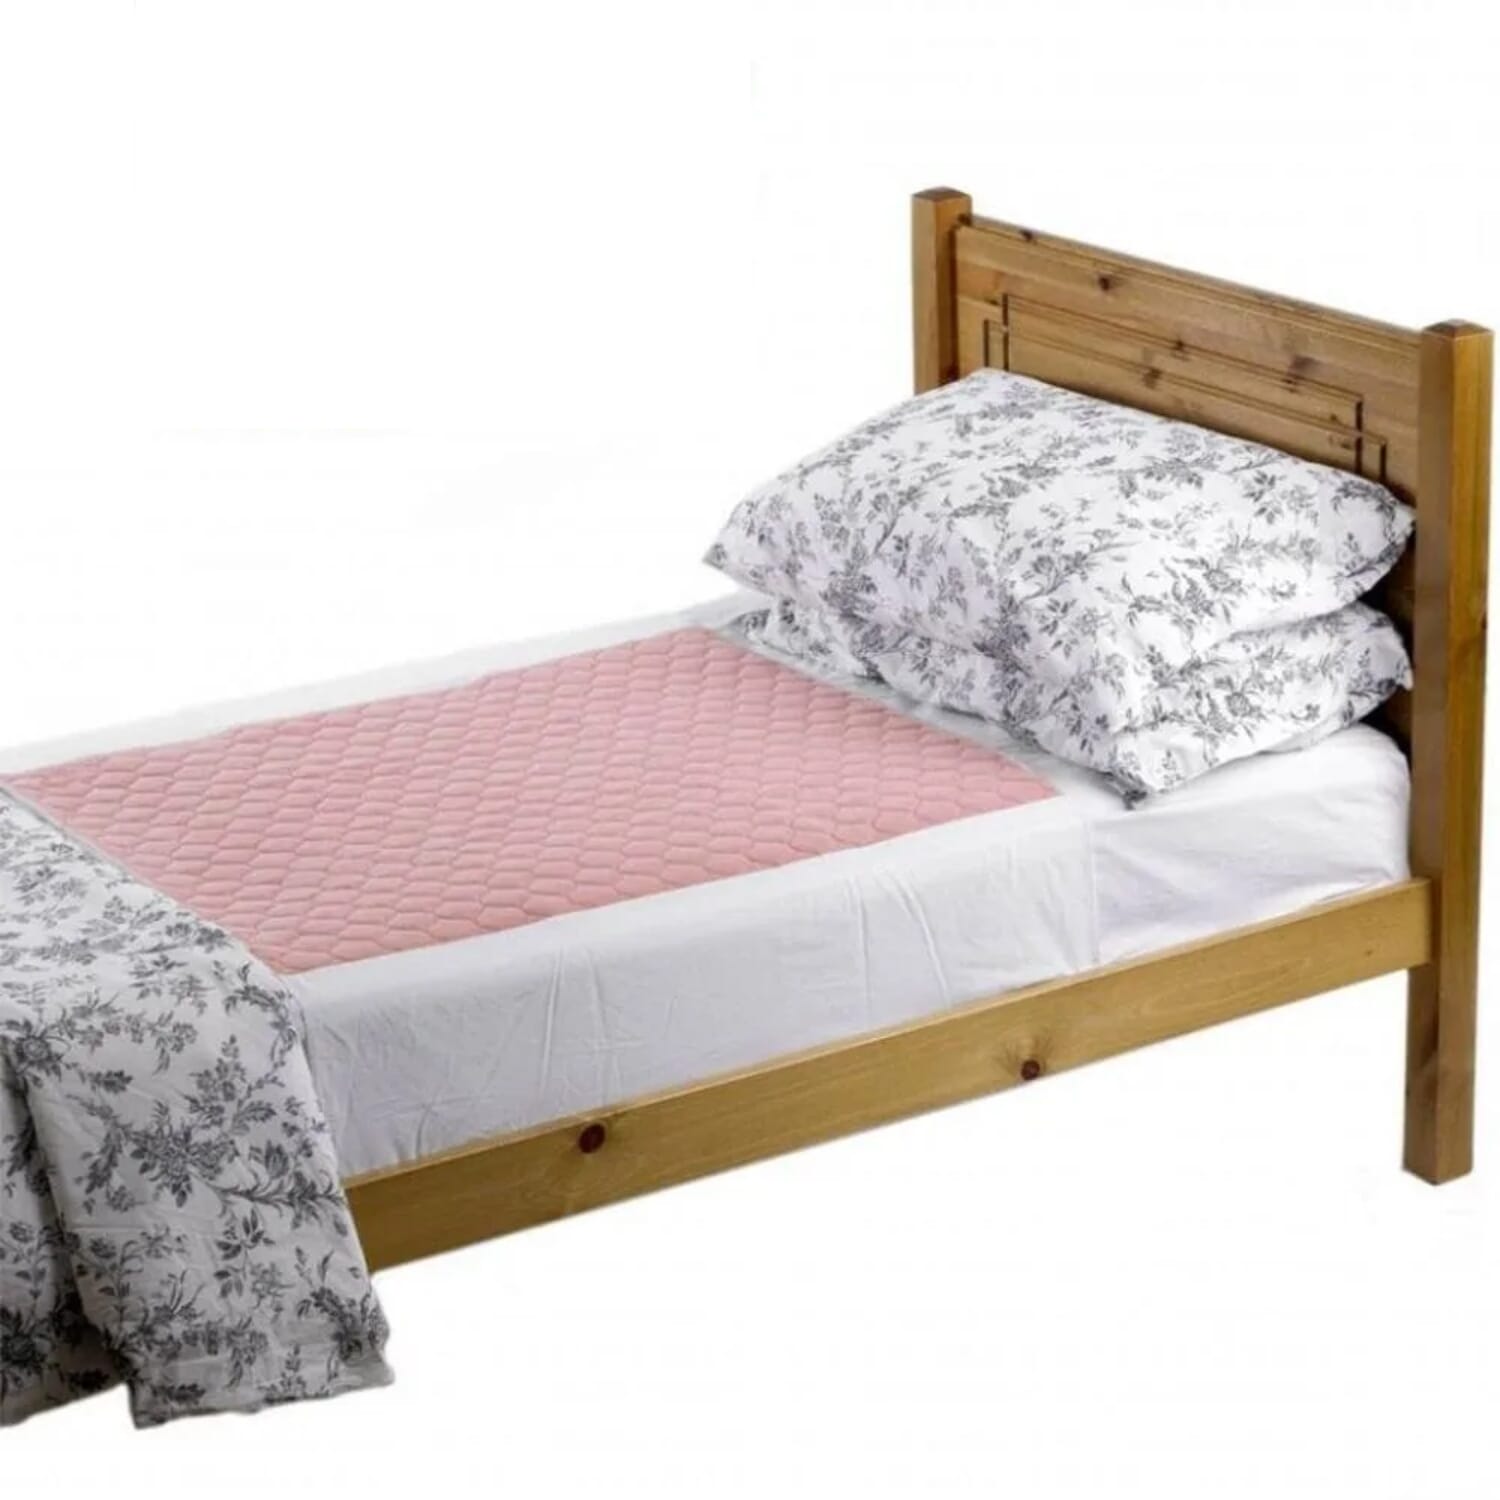 View Kylie Bed Pad 139 x 91cm 4 Litres Pink information